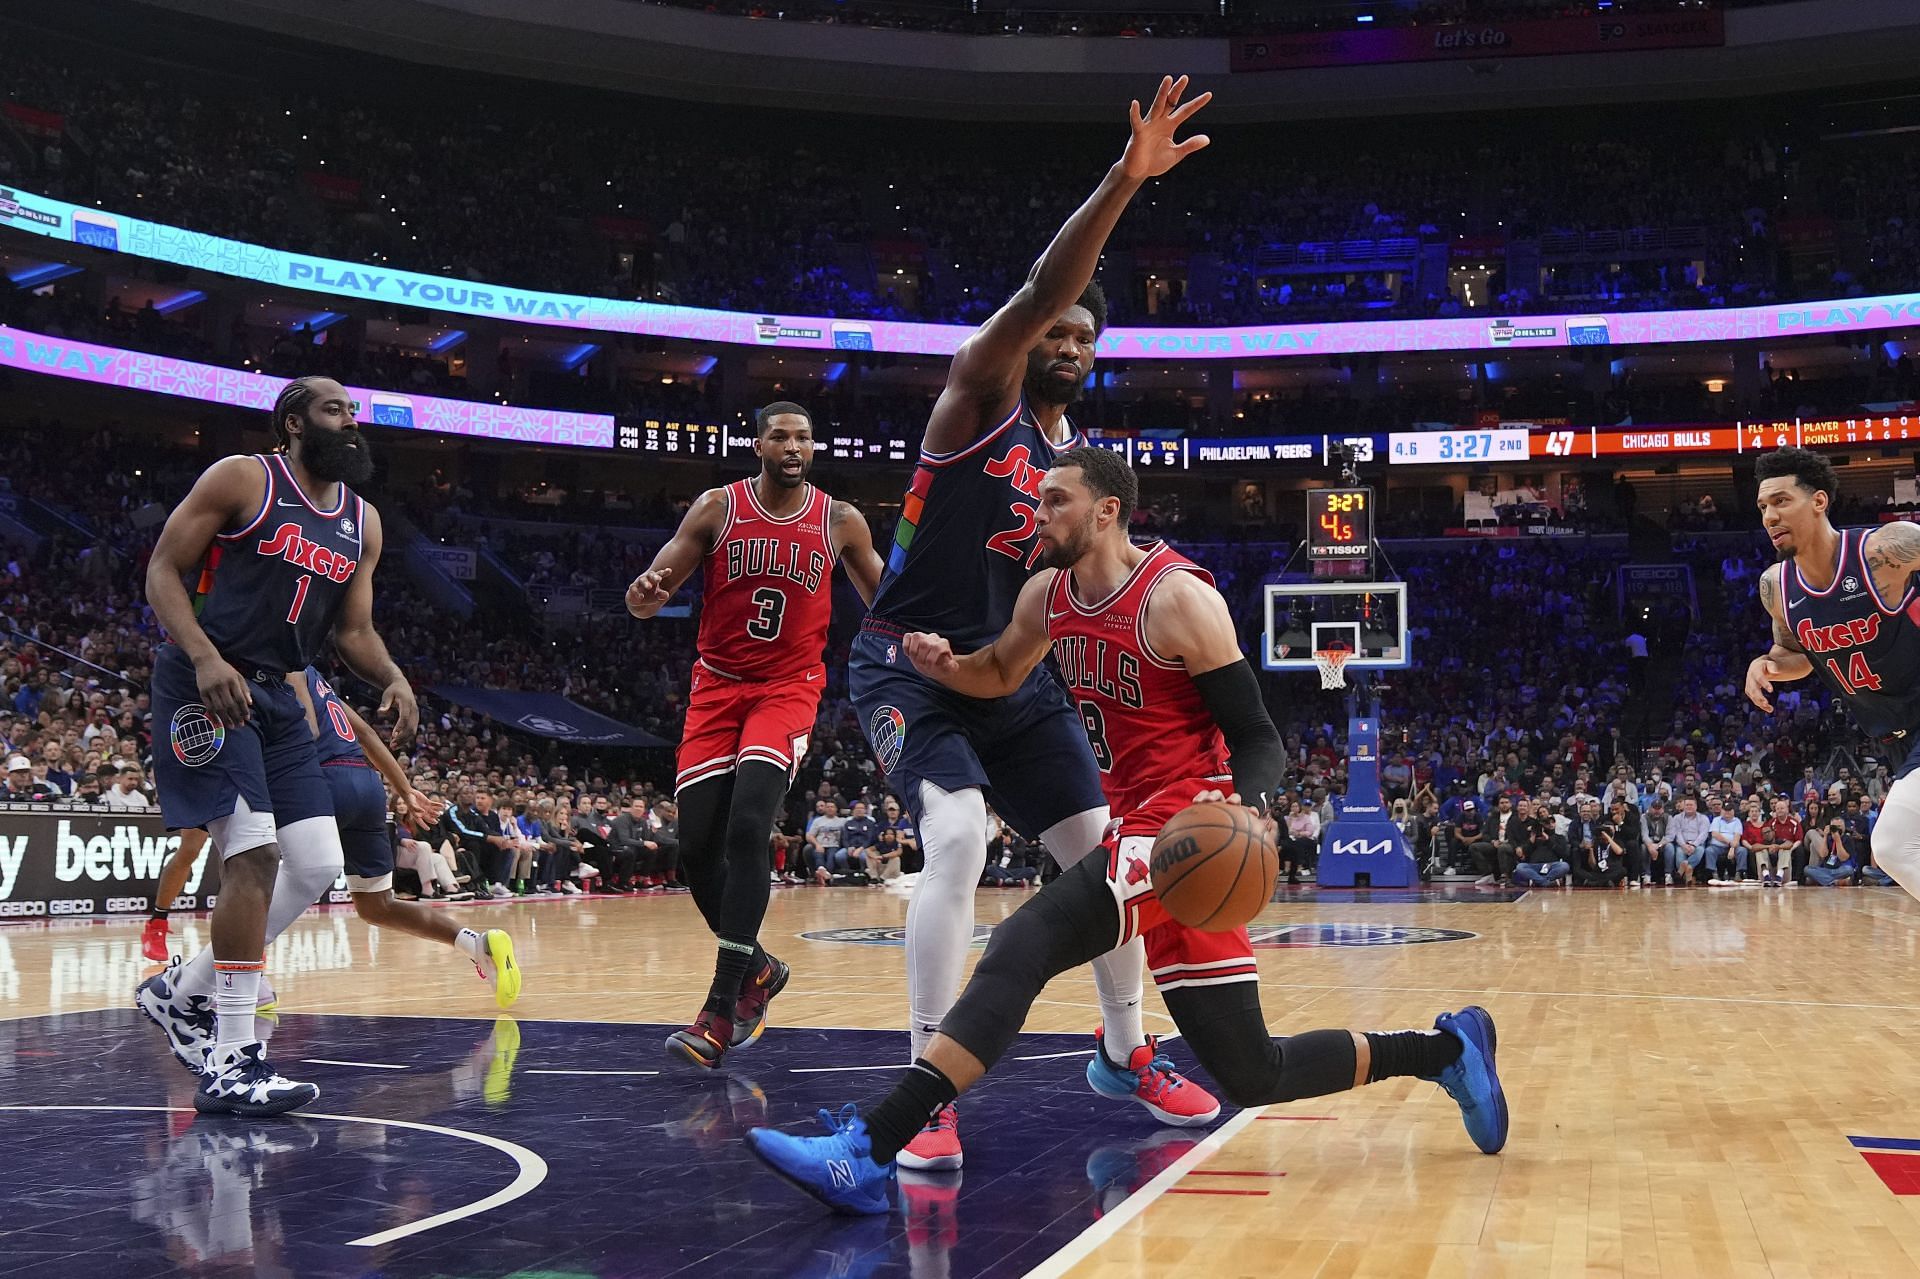 Zach LaVine #8 of the Chicago Bulls dribbles the ball to the basket against Joel Embiid #21 of the Philadelphia 76ers in the first half at the Wells Fargo Center on March 7, 2022 in Philadelphia, Pennsylvania.